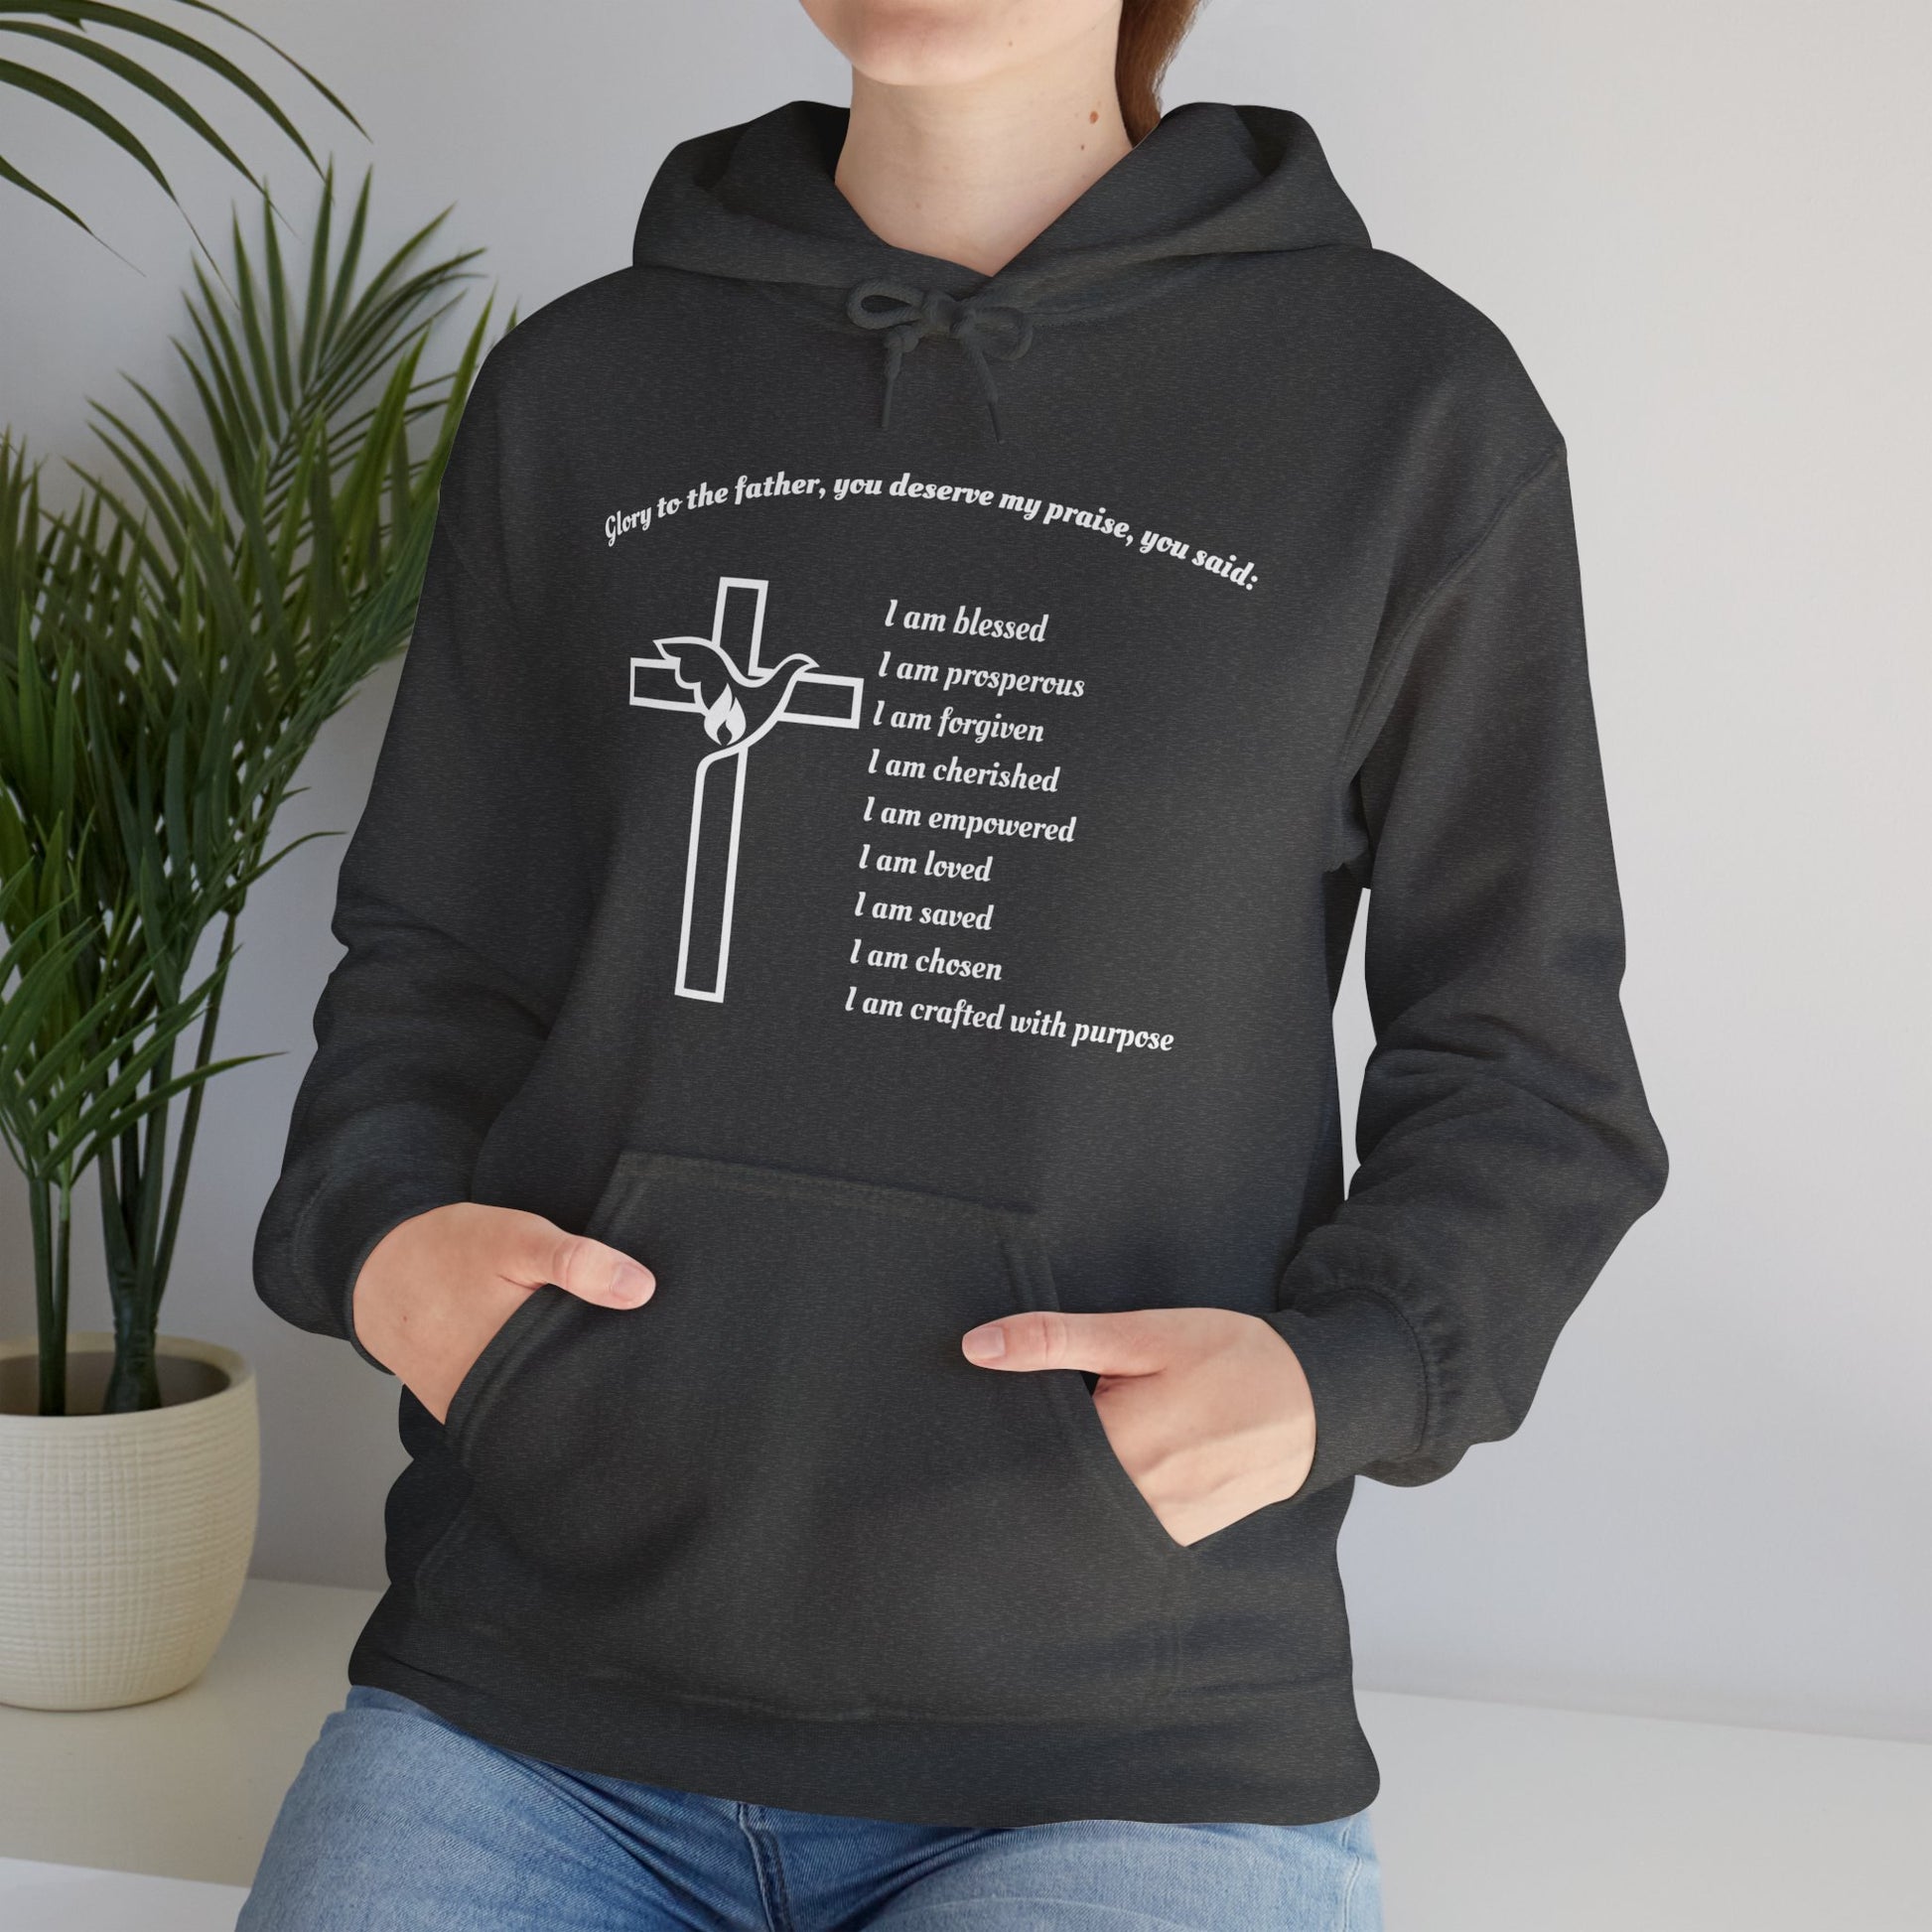 I am Glory to the Father Hooded Sweatshirt Unisex Cozy Heavy Blend39